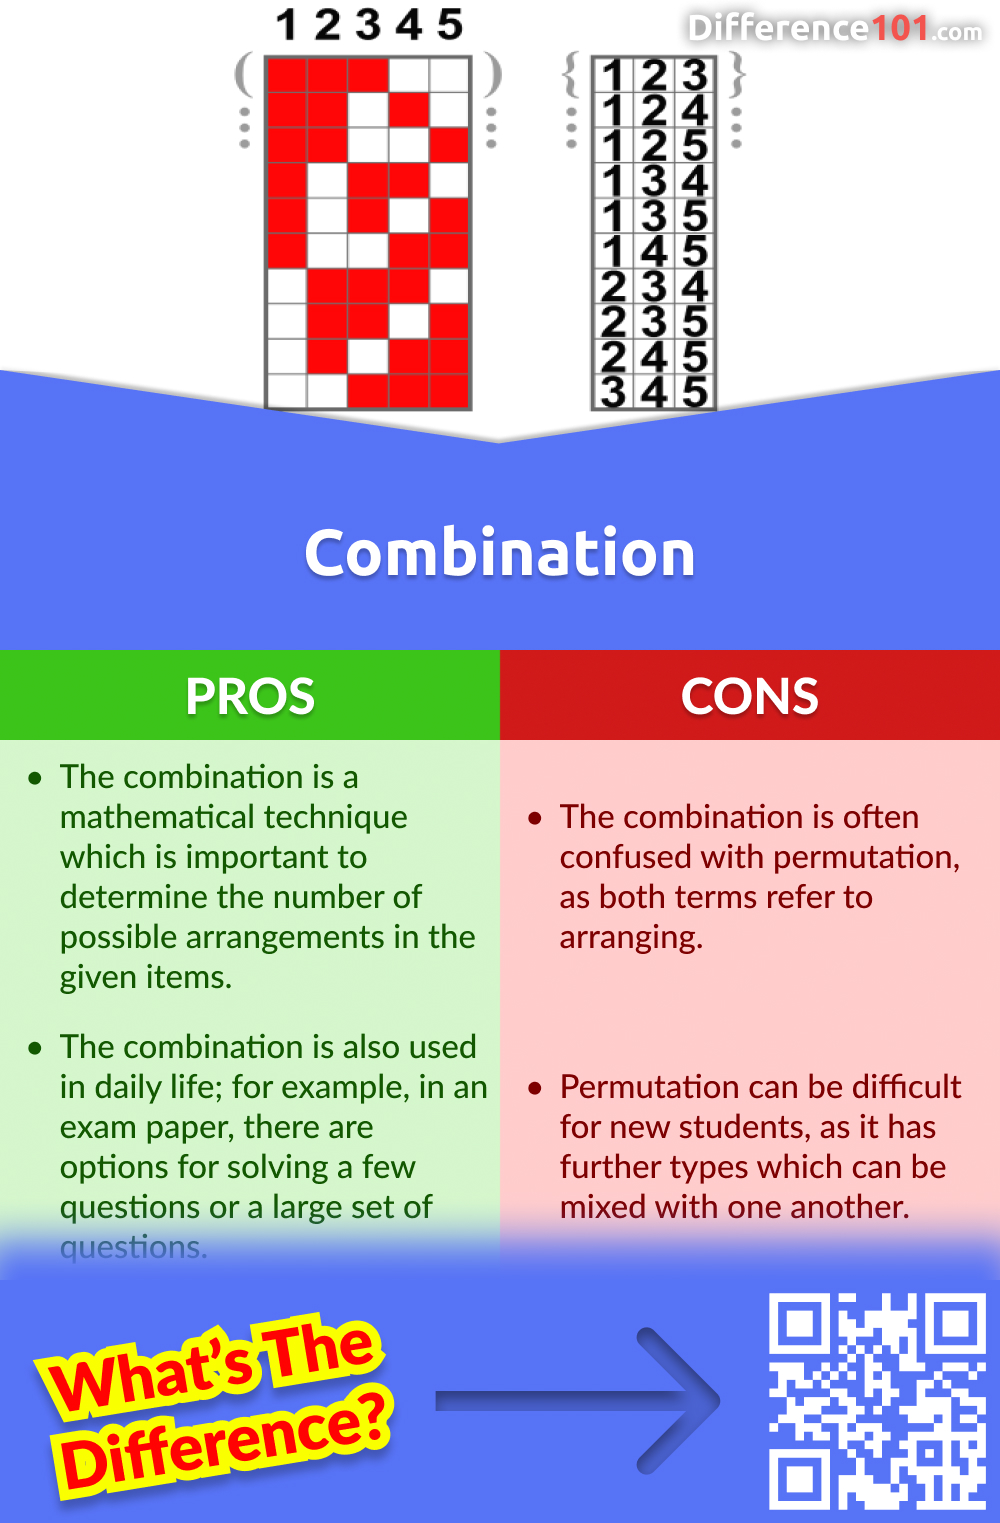 Combination Pros and Cons